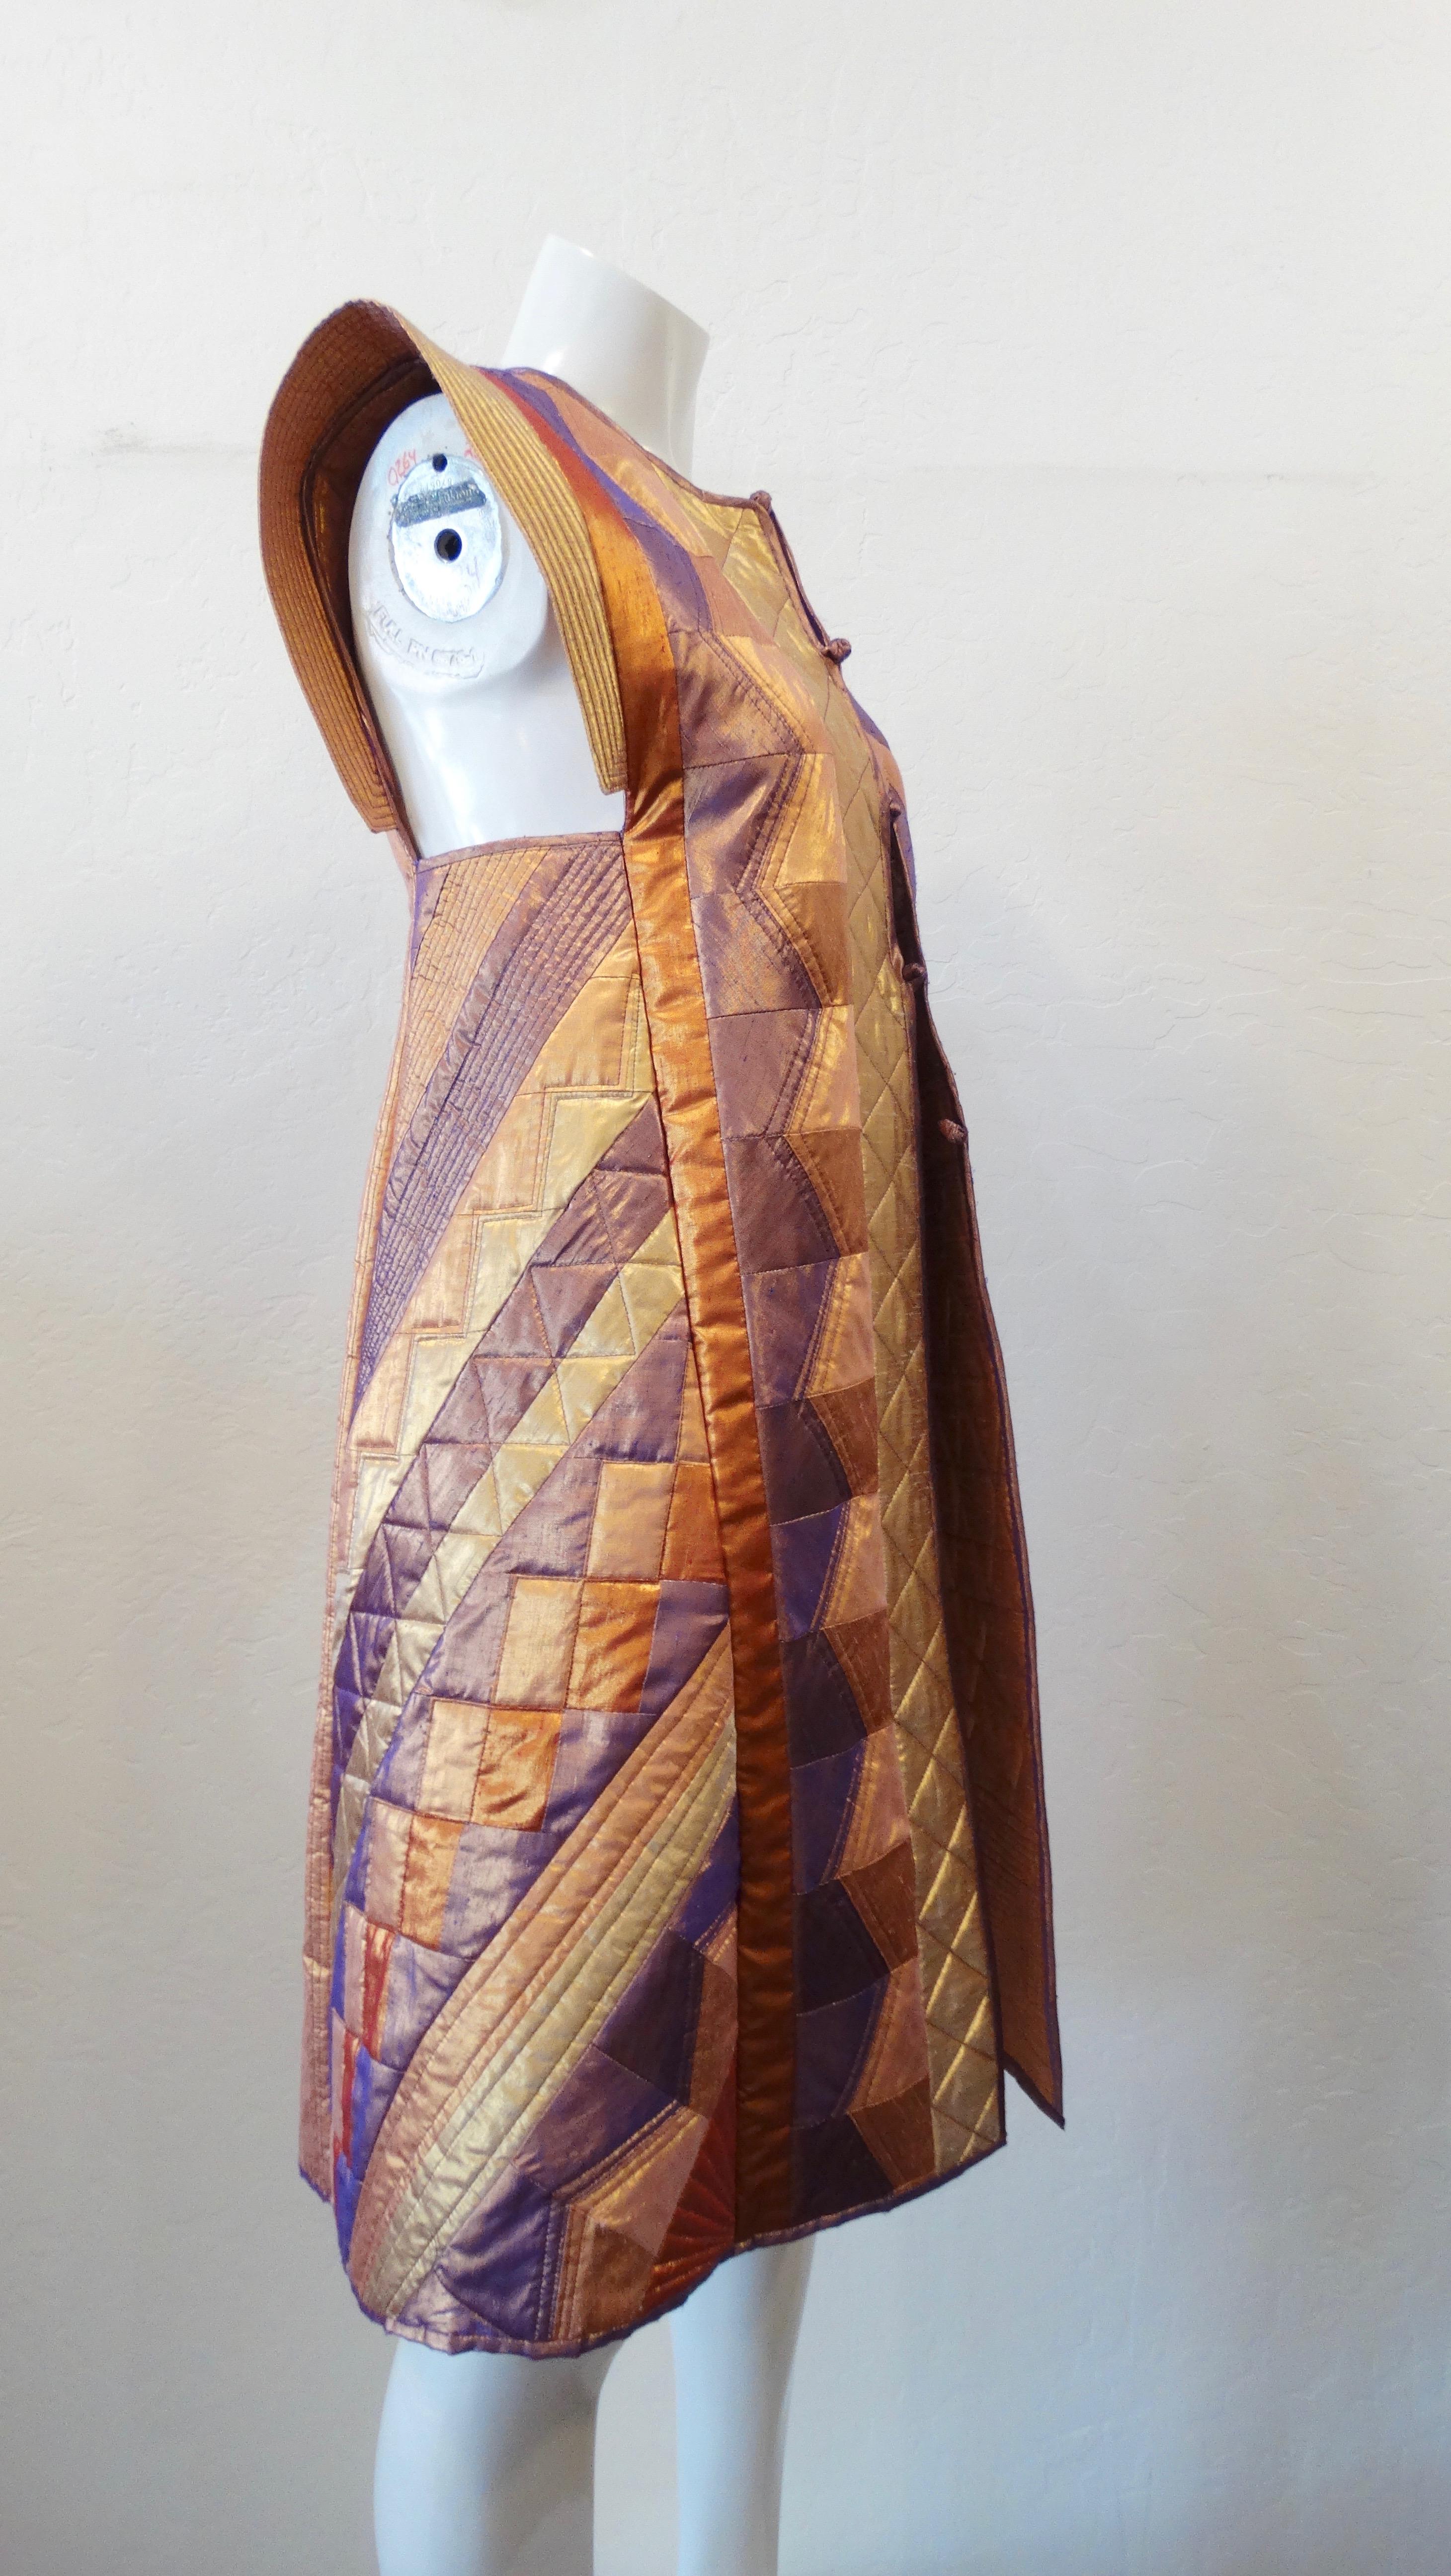 Super unique vintage handmade quilted patchwork jacket! Made up of satins in   shades of gold, bronze and purple! Intricate quilting and patchwork details throughout the entire jacket. The structured sleeves and modest neckline give this piece an